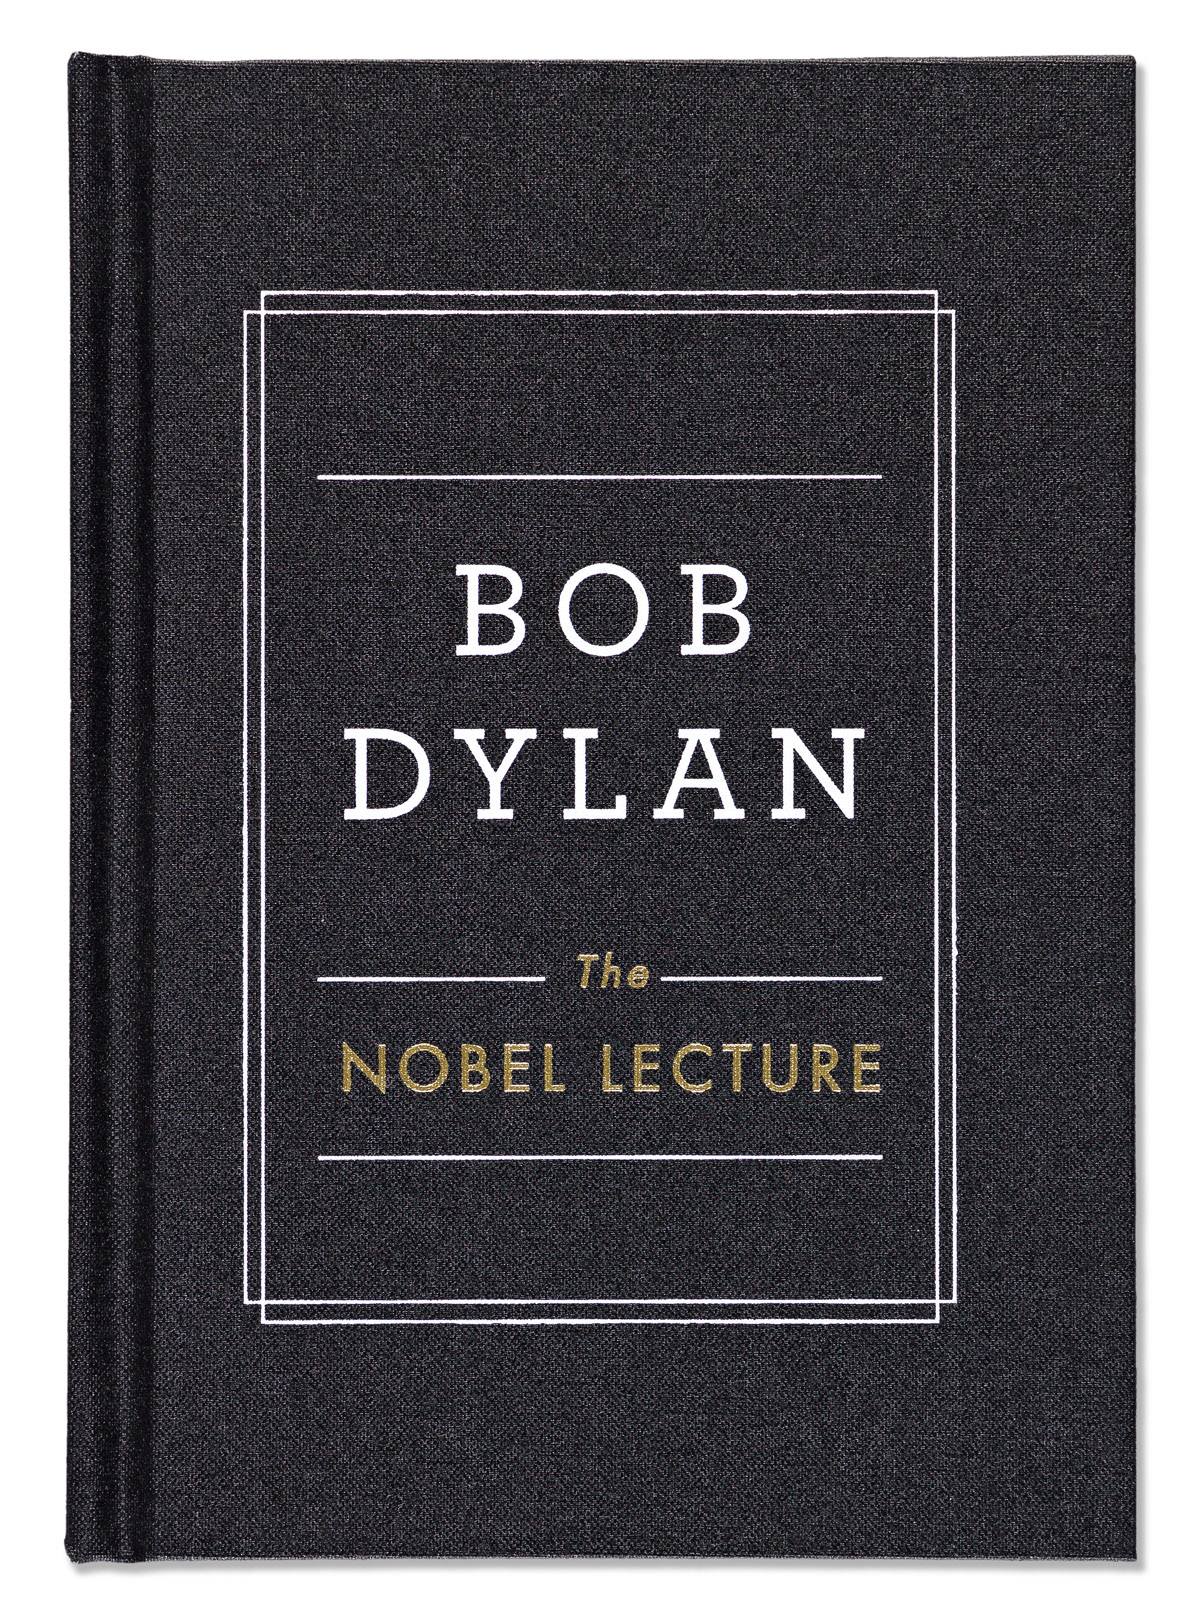 DYLAN, BOB. The Nobel Lecture.